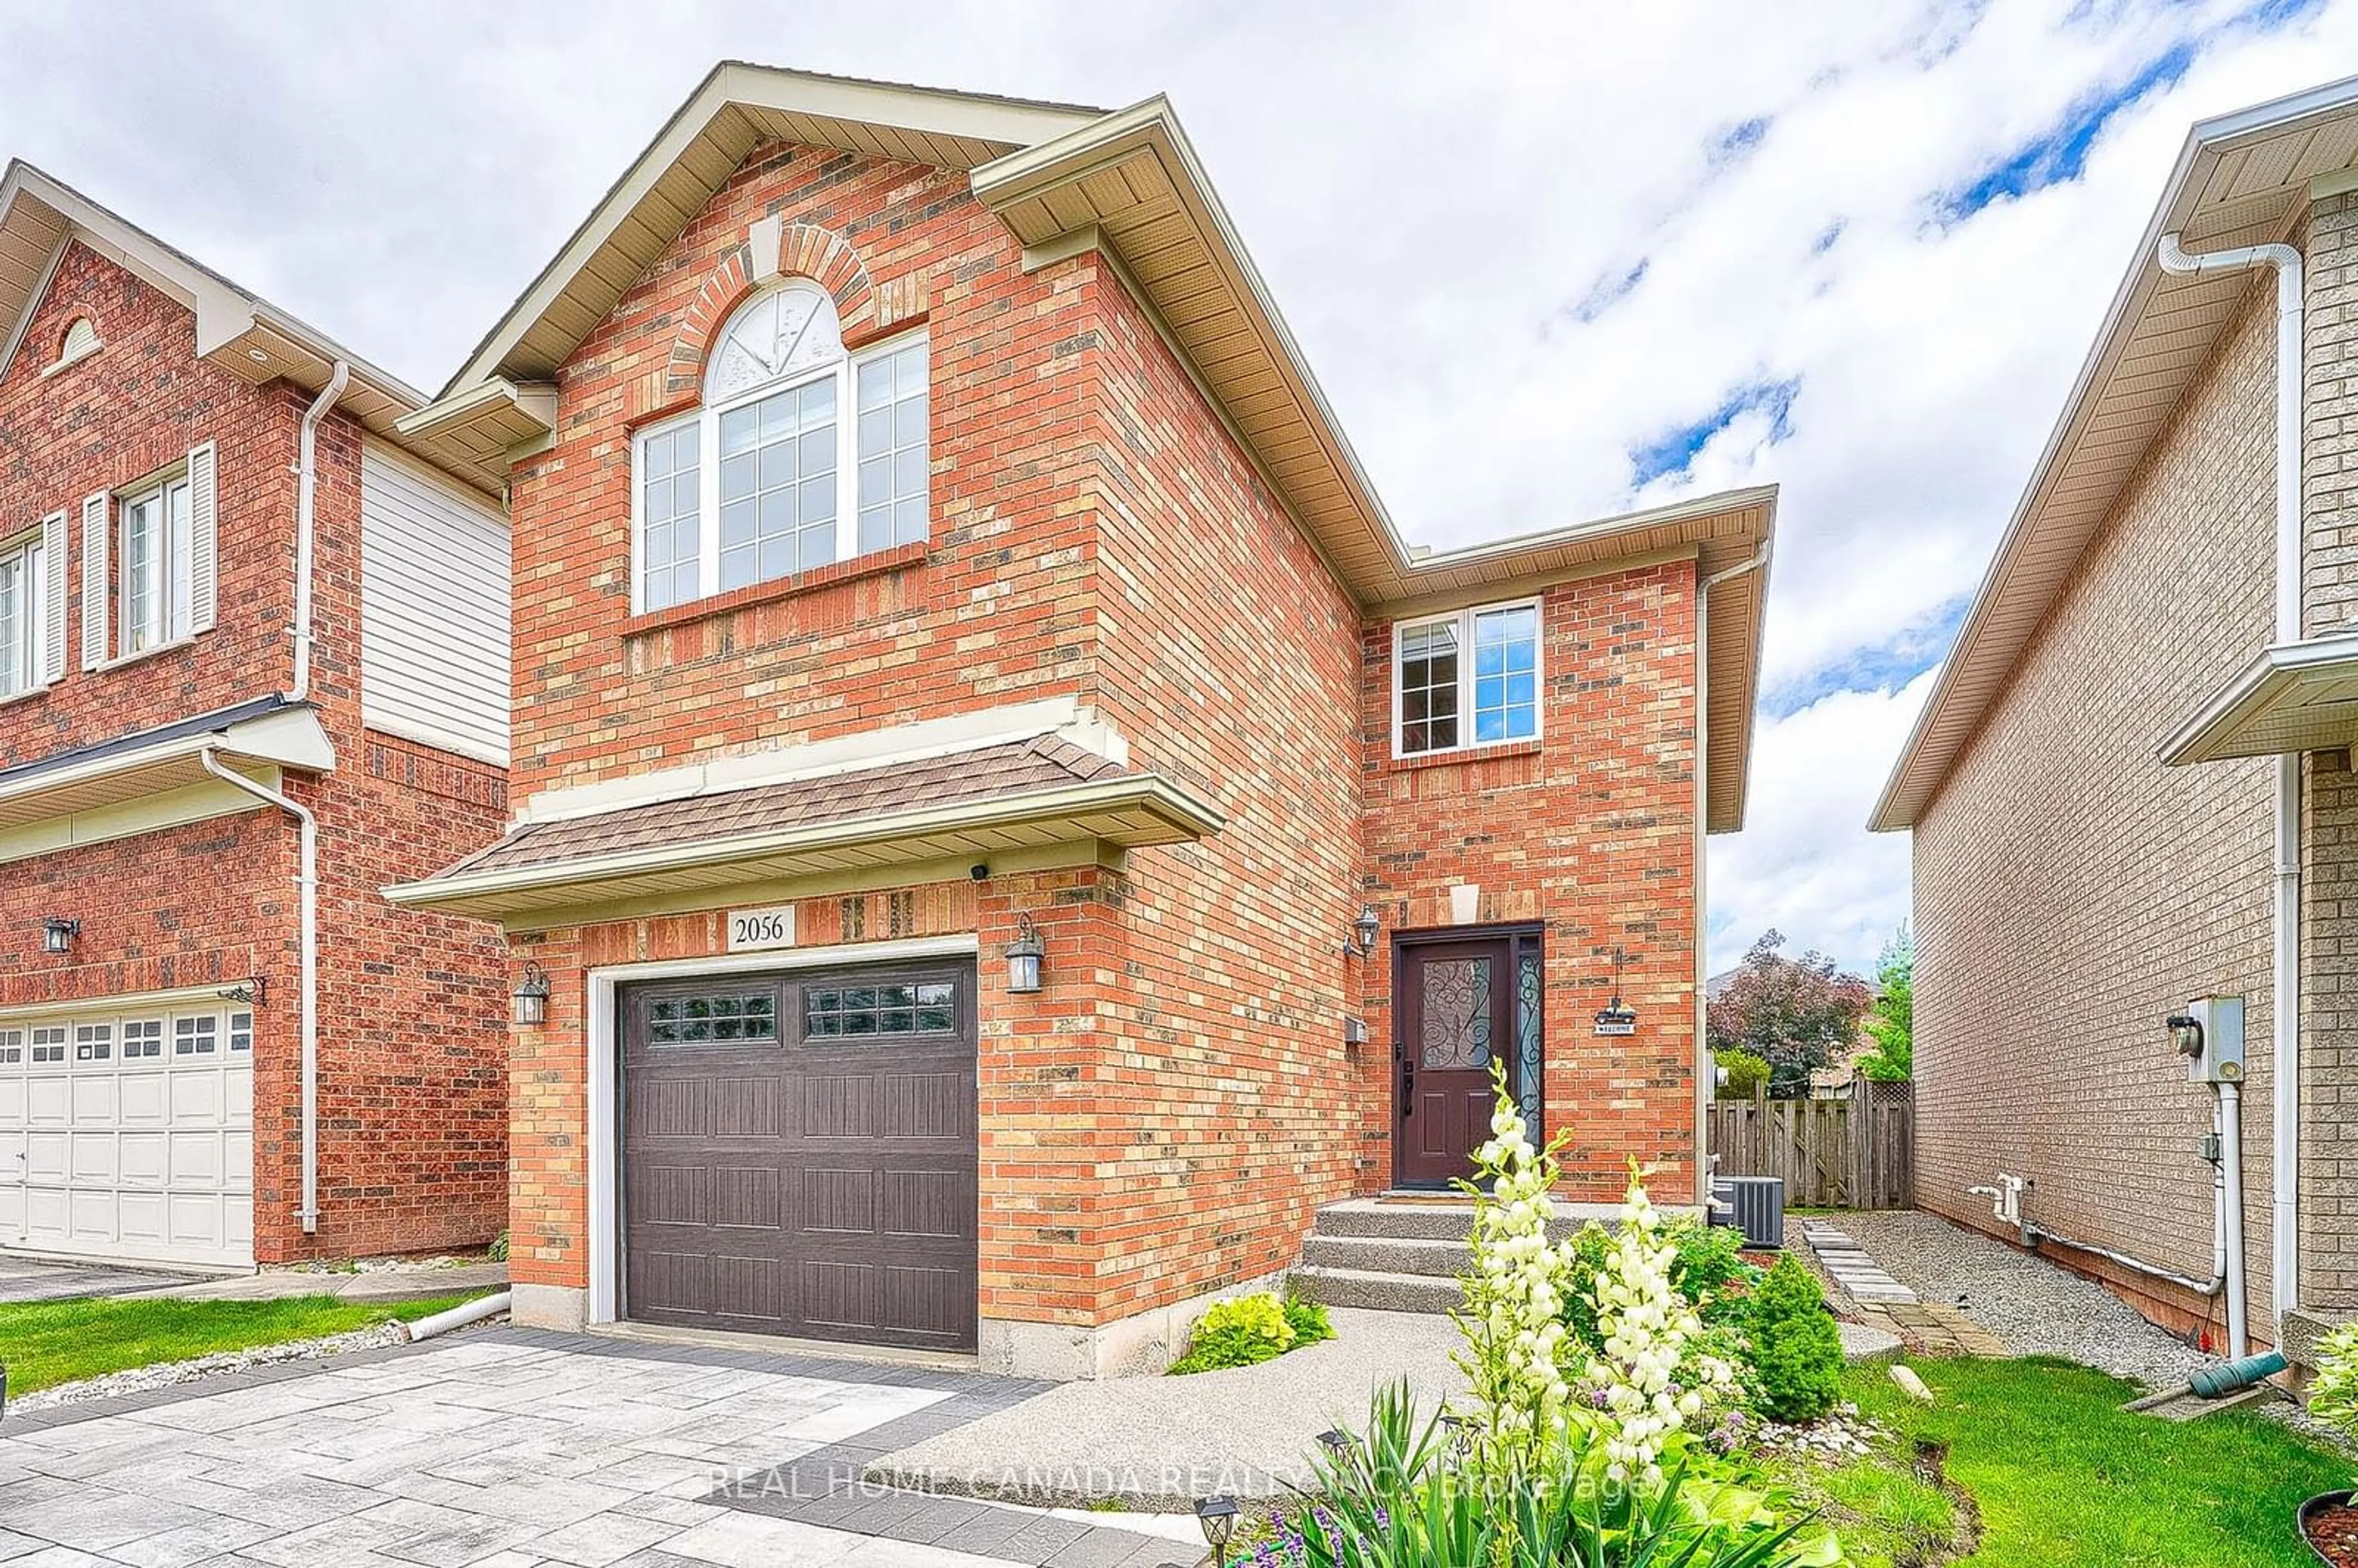 Home with brick exterior material for 2056 Shady Glen Rd, Oakville Ontario L6M 3P2